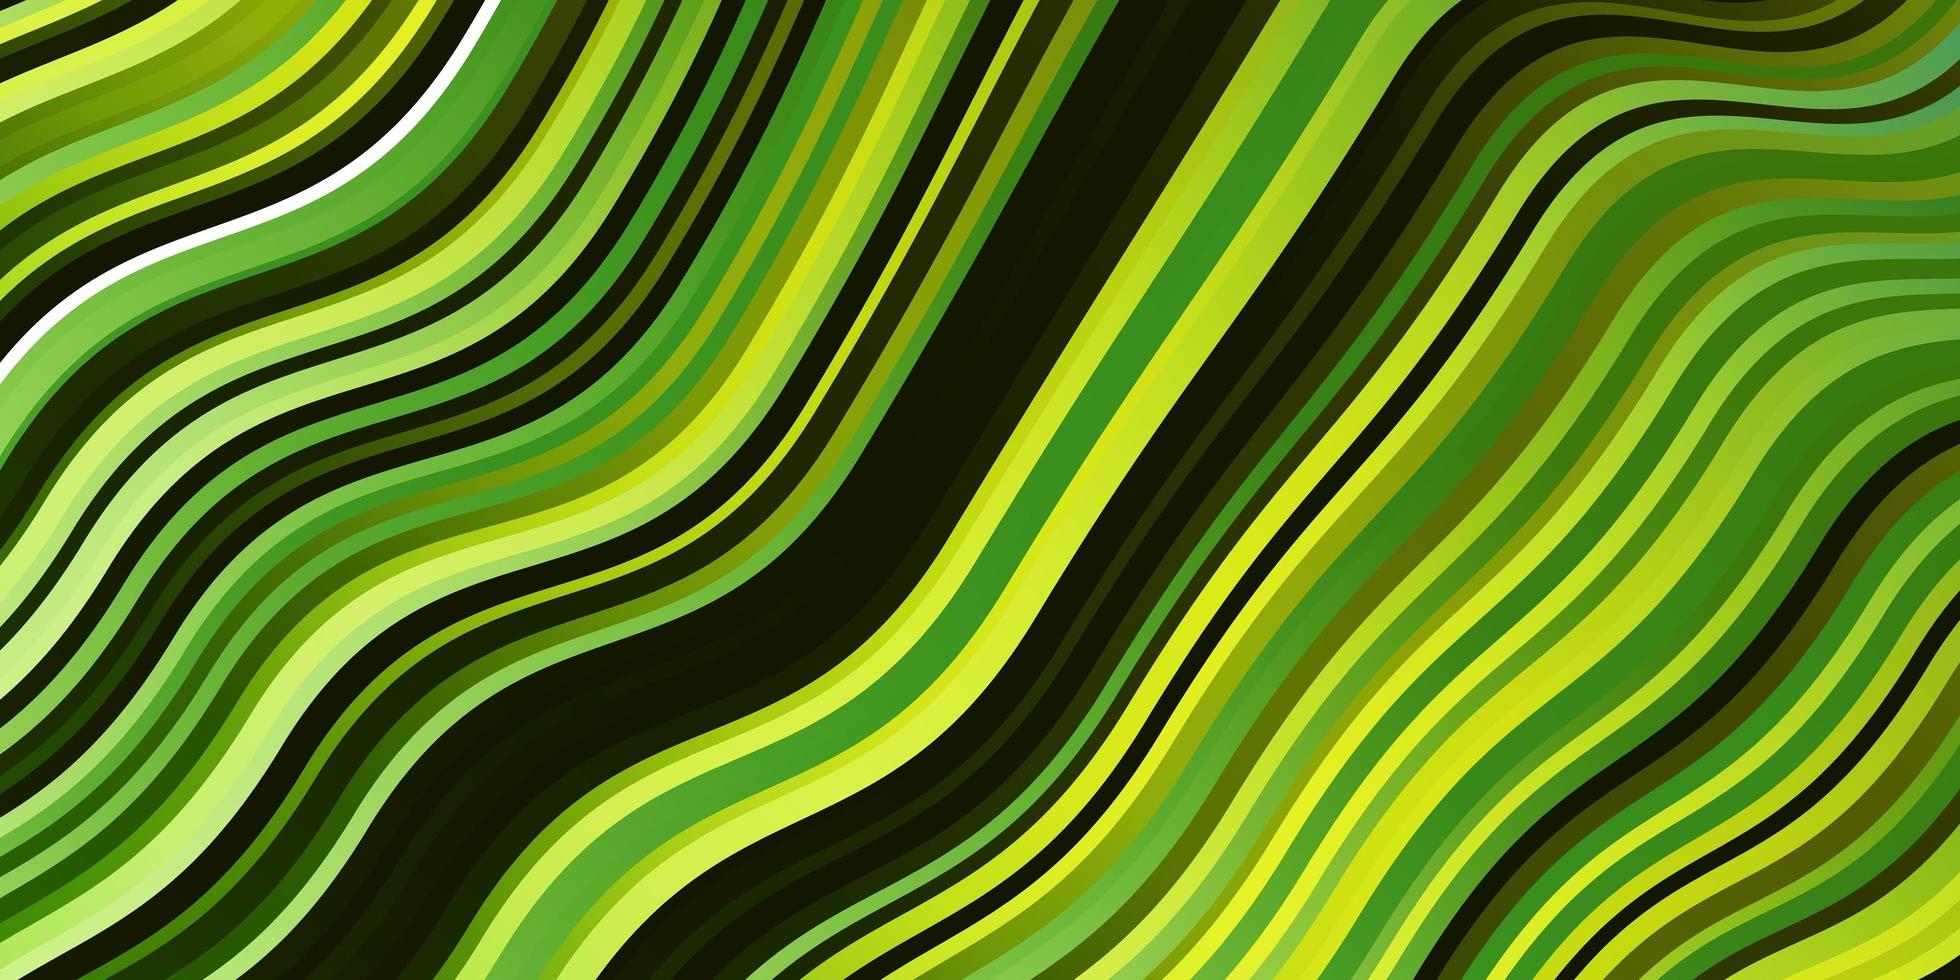 Light Green, Yellow vector background with curved lines. Illustration in abstract style with gradient curved. Best design for your ad, poster, banner.